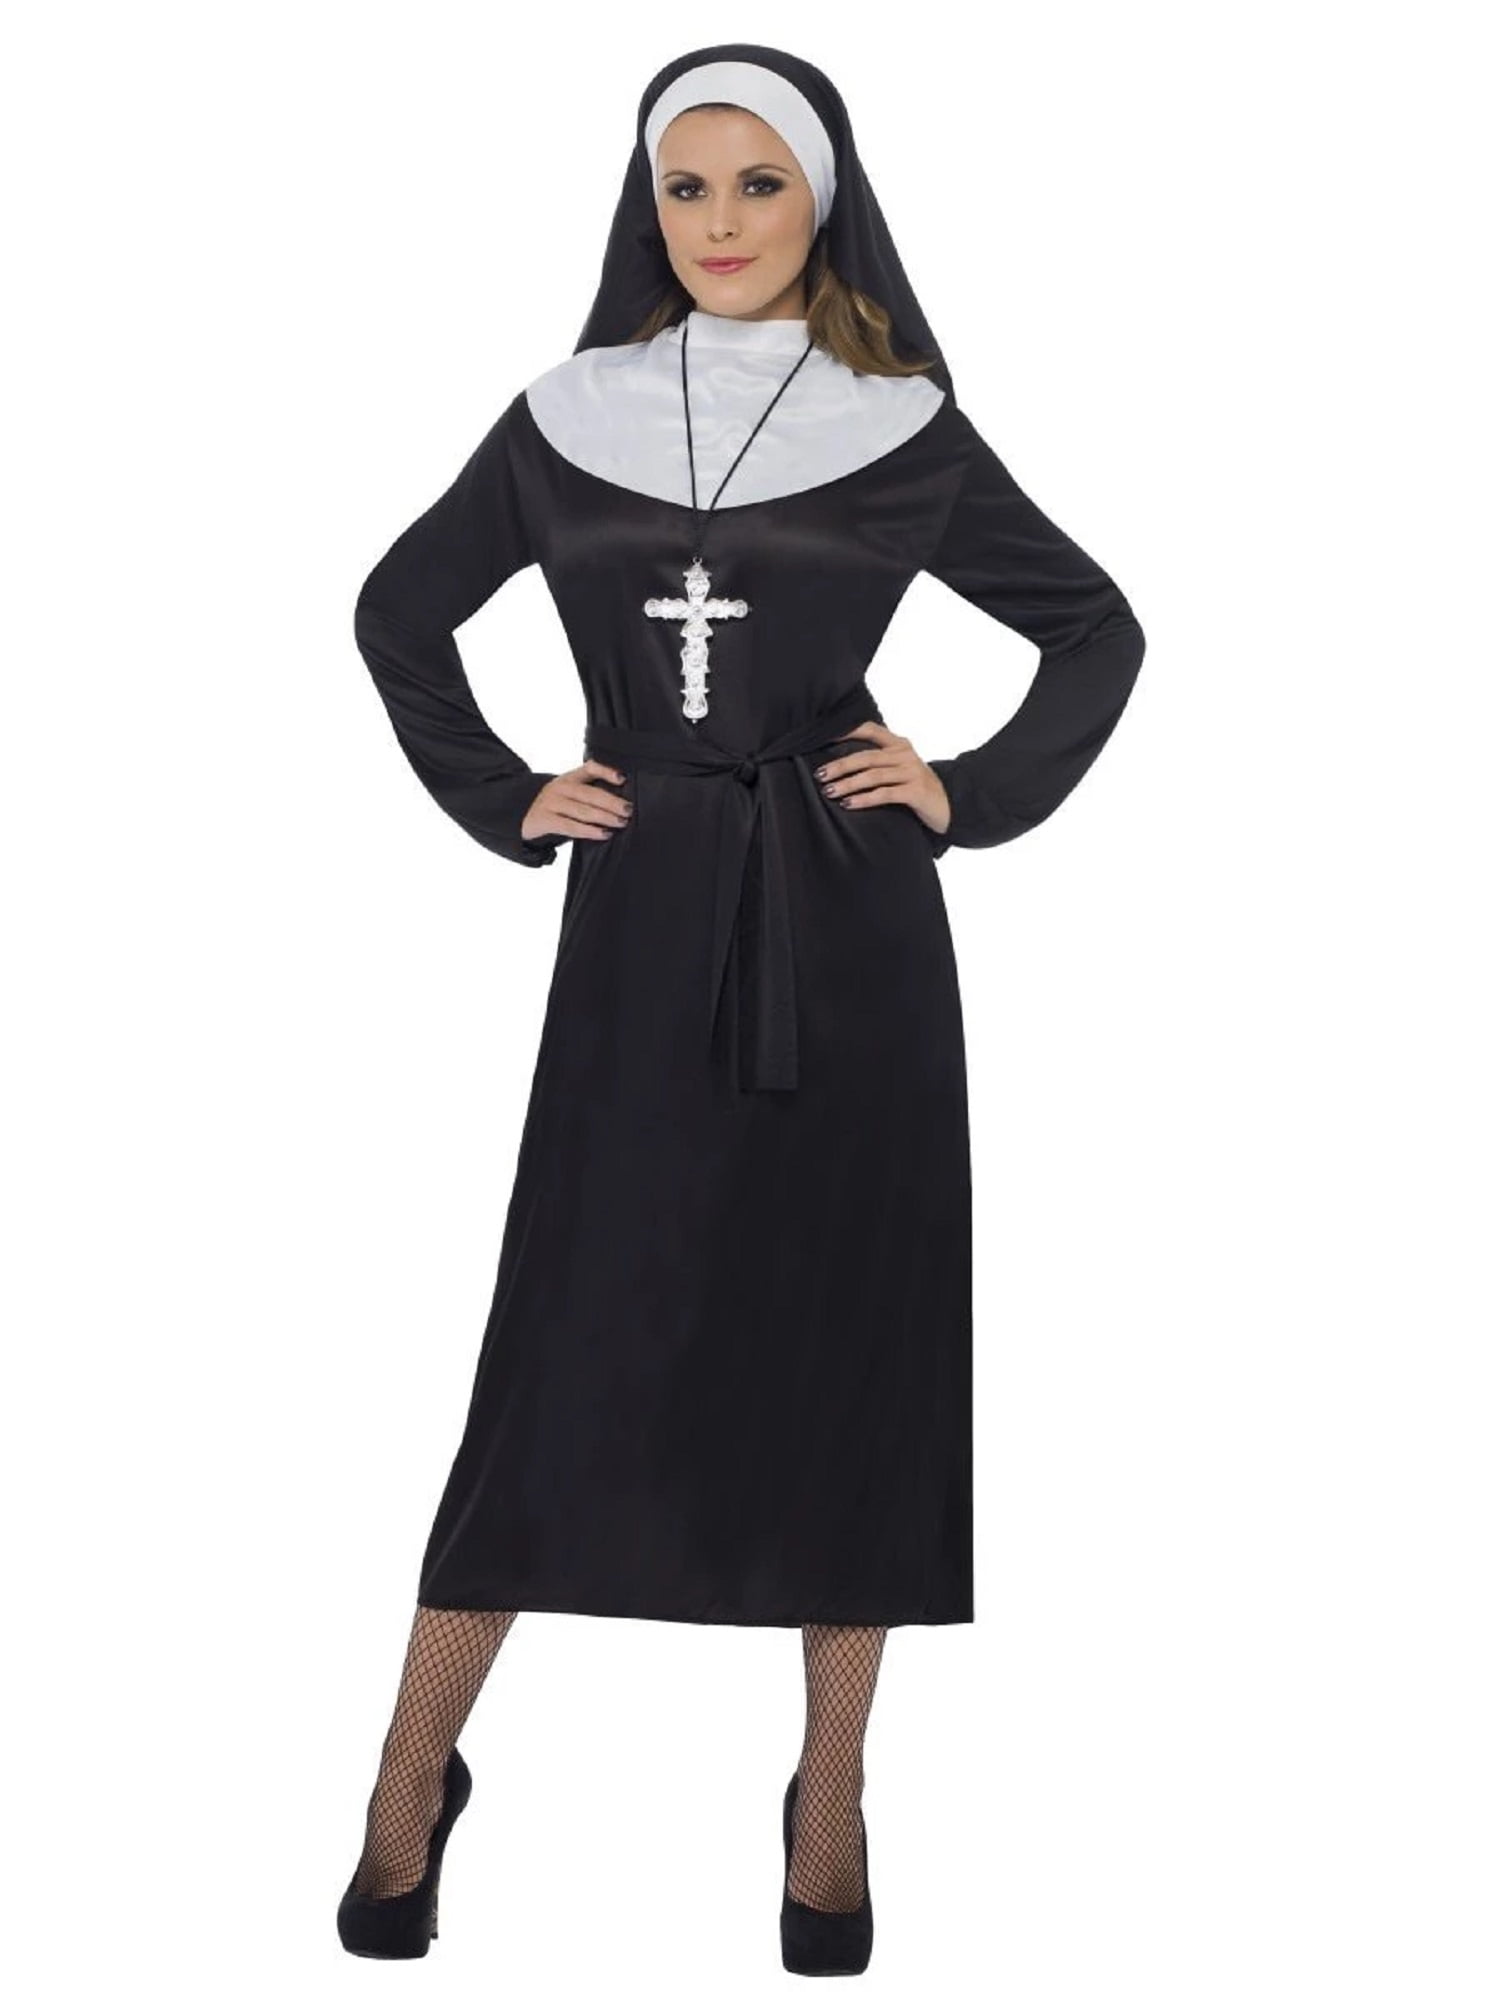 Halloween Ladies Nun Costume White Nuns Outfit Fancy Dress Relgious Figure Ghost